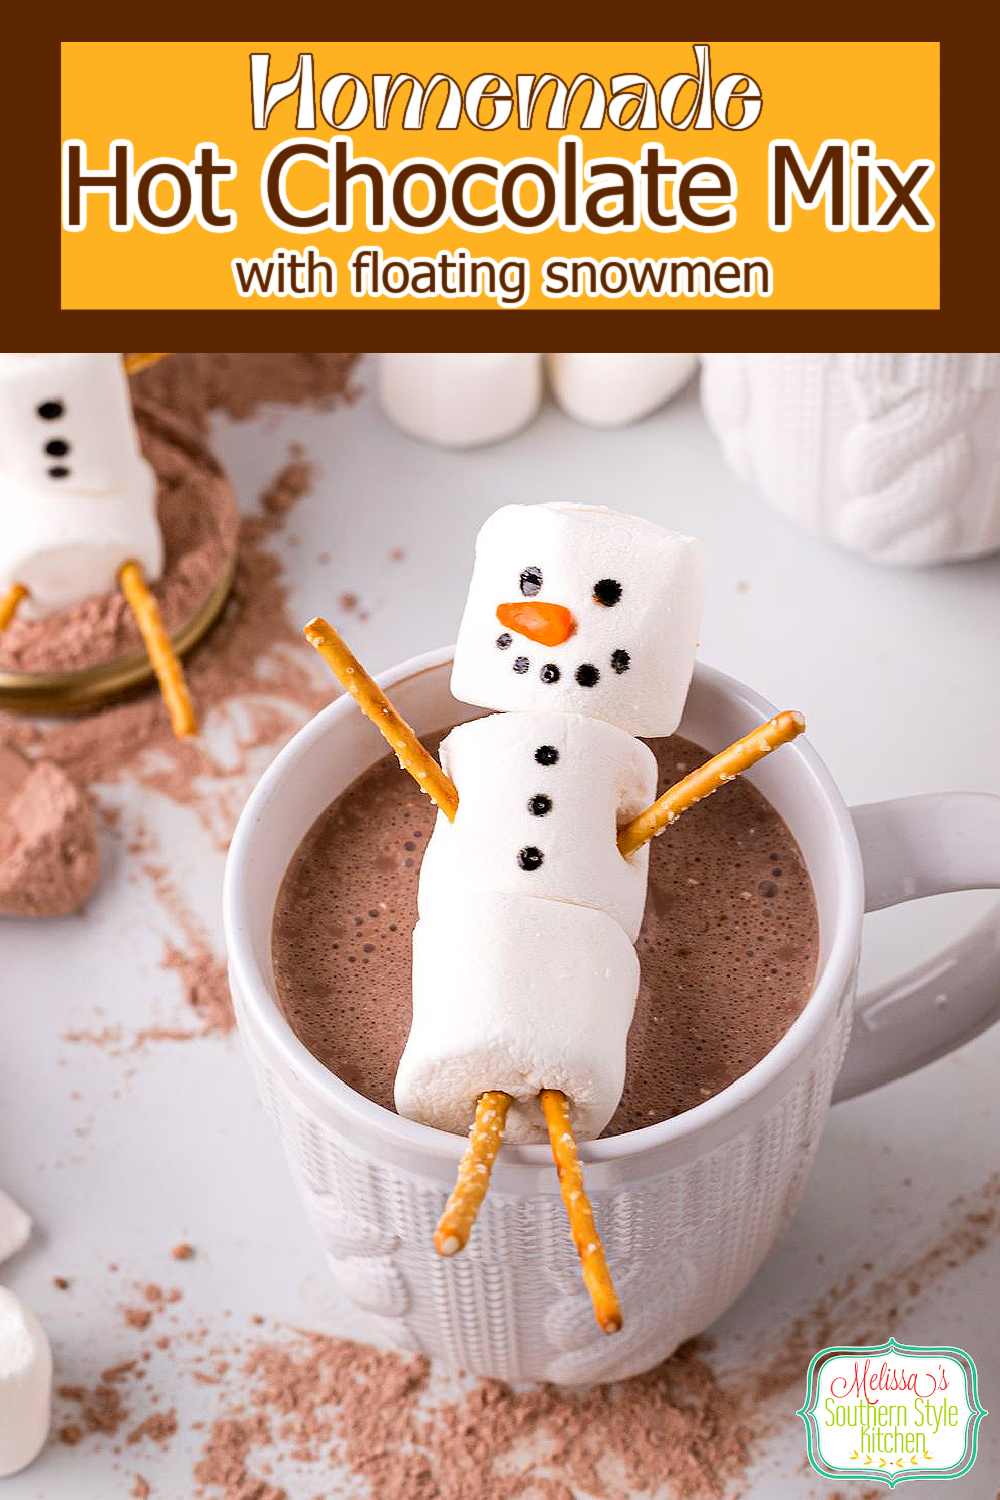 This oh-so-easy Hot Chocolate Mix topped with homemade floating snowmen is perfect for DIY family projects and homemade gift giving #hotchocolatemix #hotcocoa #hotchocolaterecipe #easyhotcocoa #hotchocolate #DIY #homemadegifts #chocolate